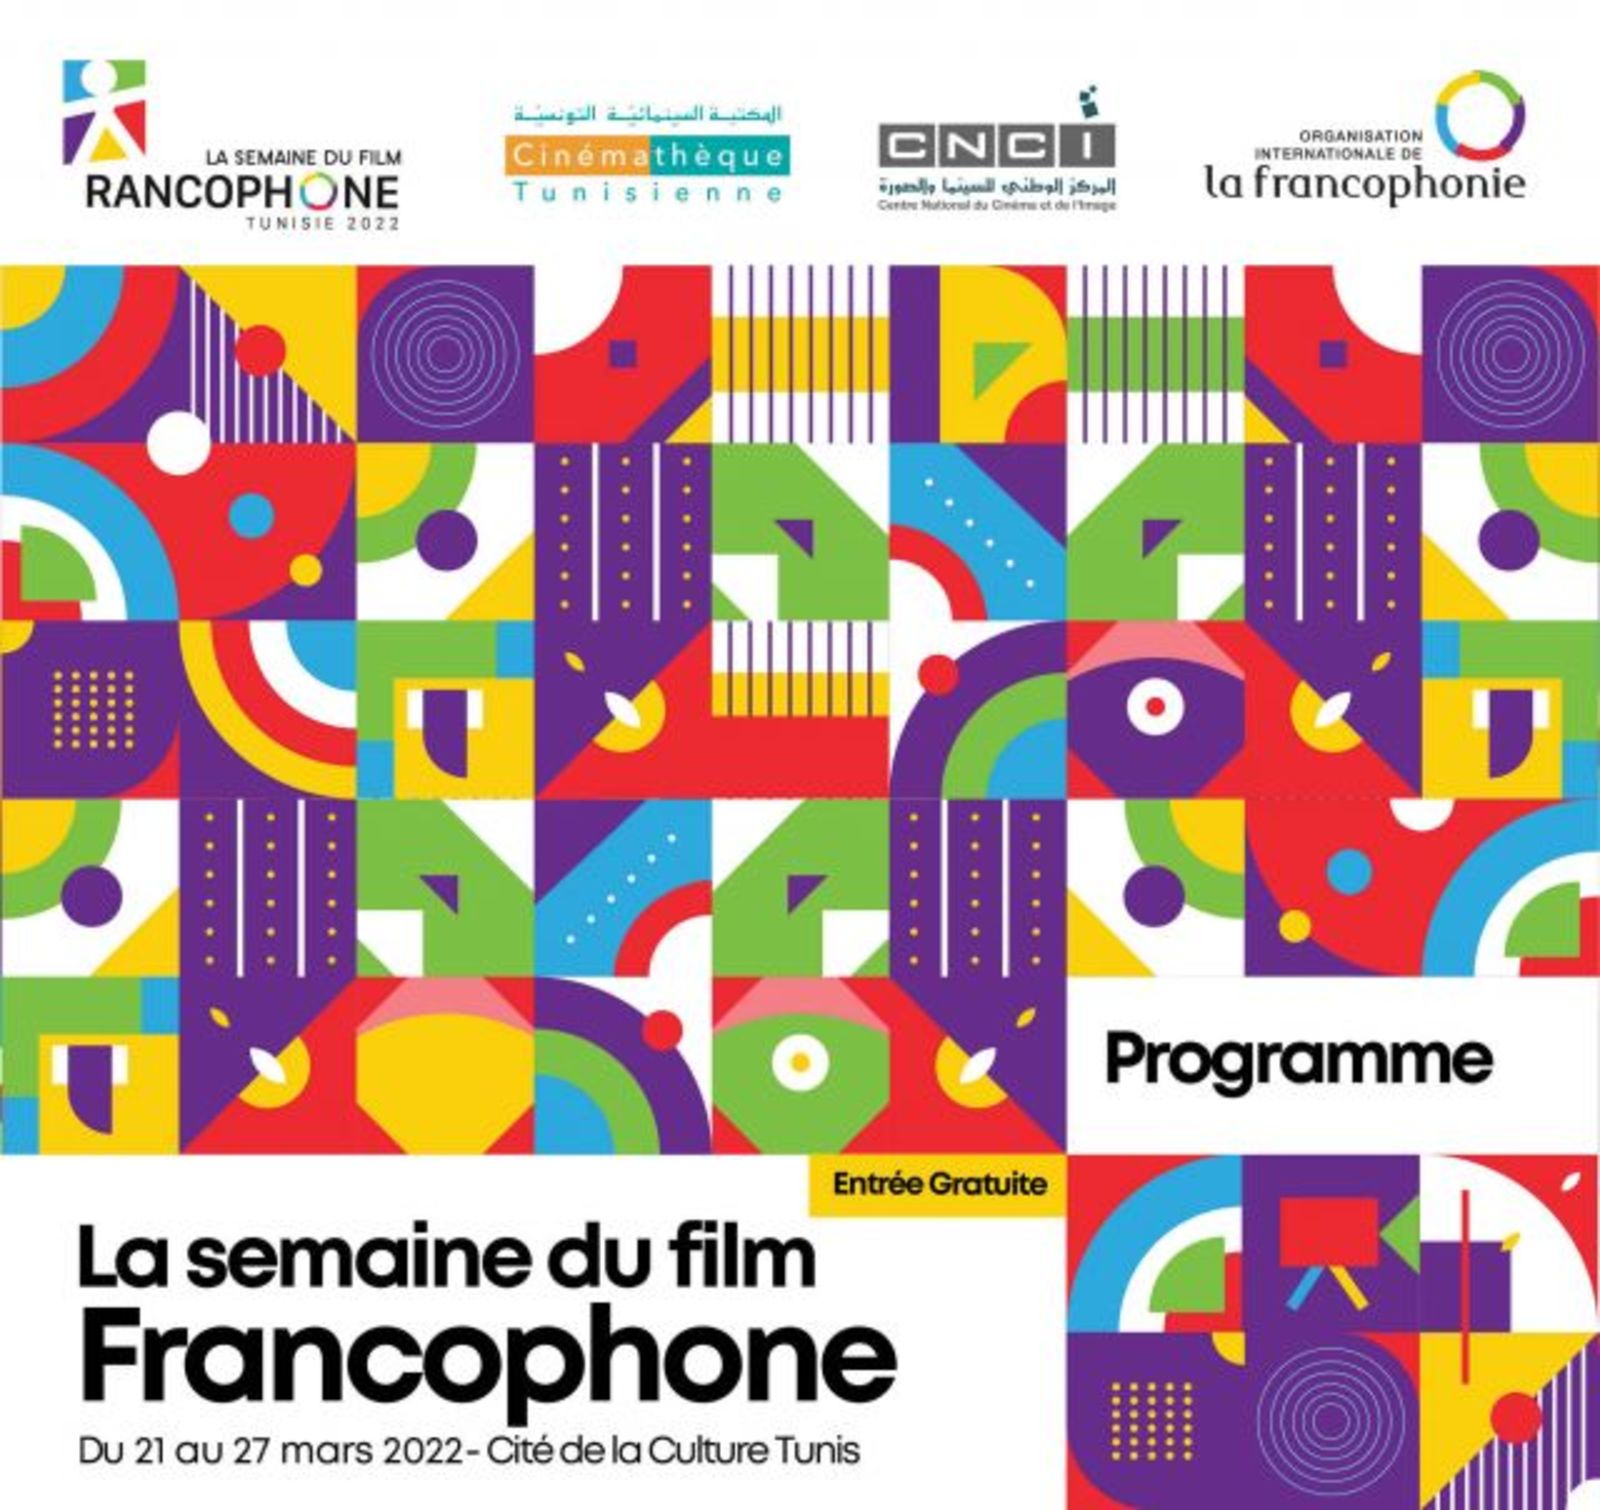 Bulgarian Participation in the Week of Francophone Cinema in Tunisia